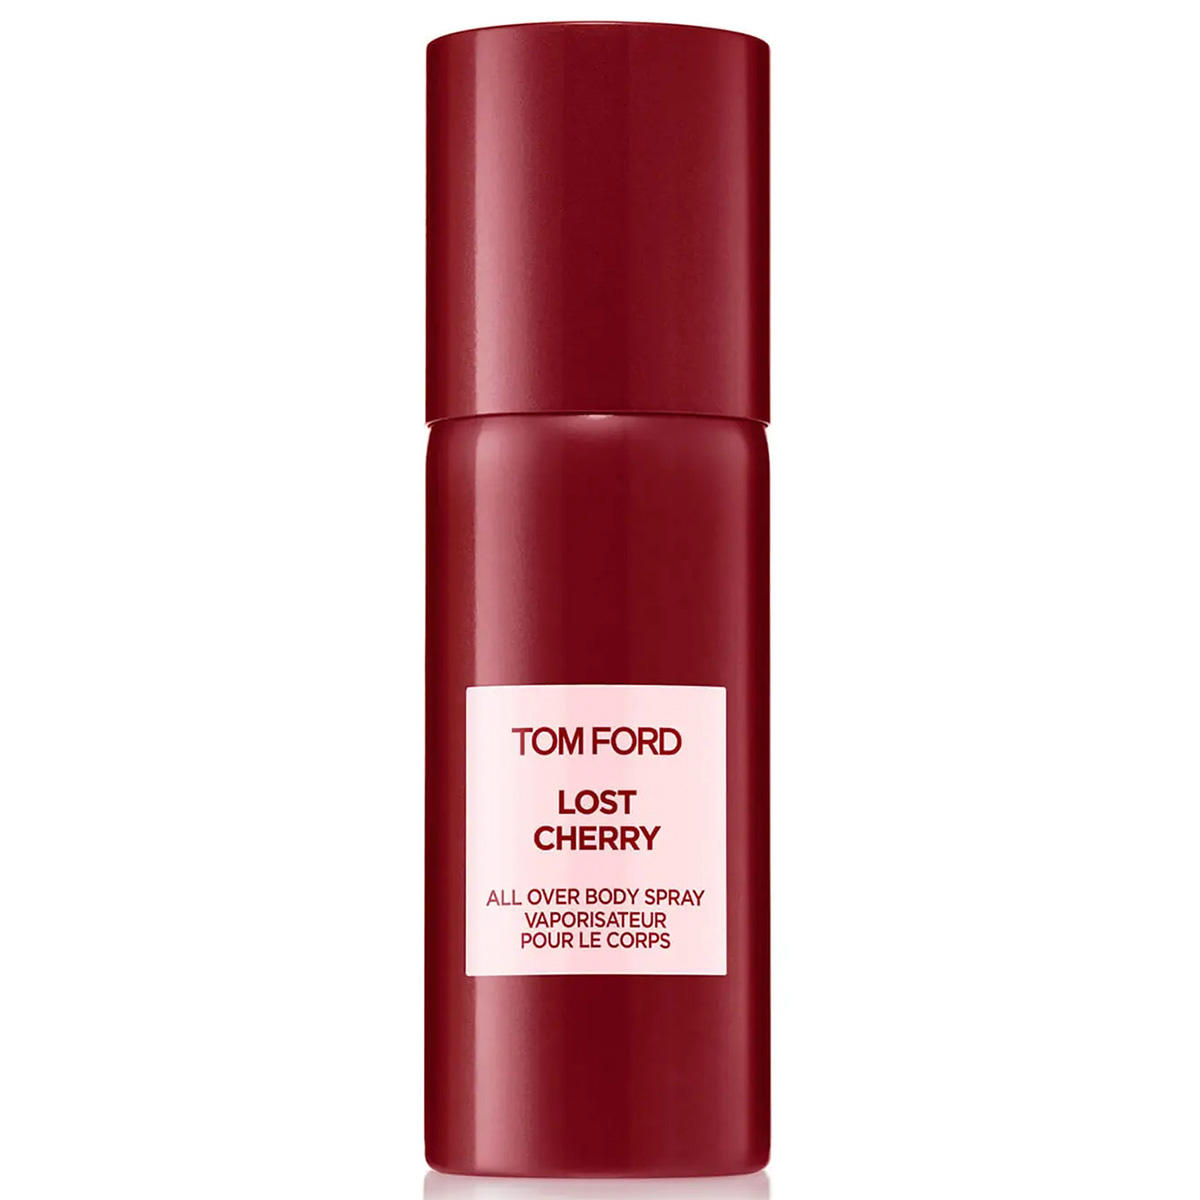 Tom Ford Lost Cherry All Over Body Spray 150 ml - 1